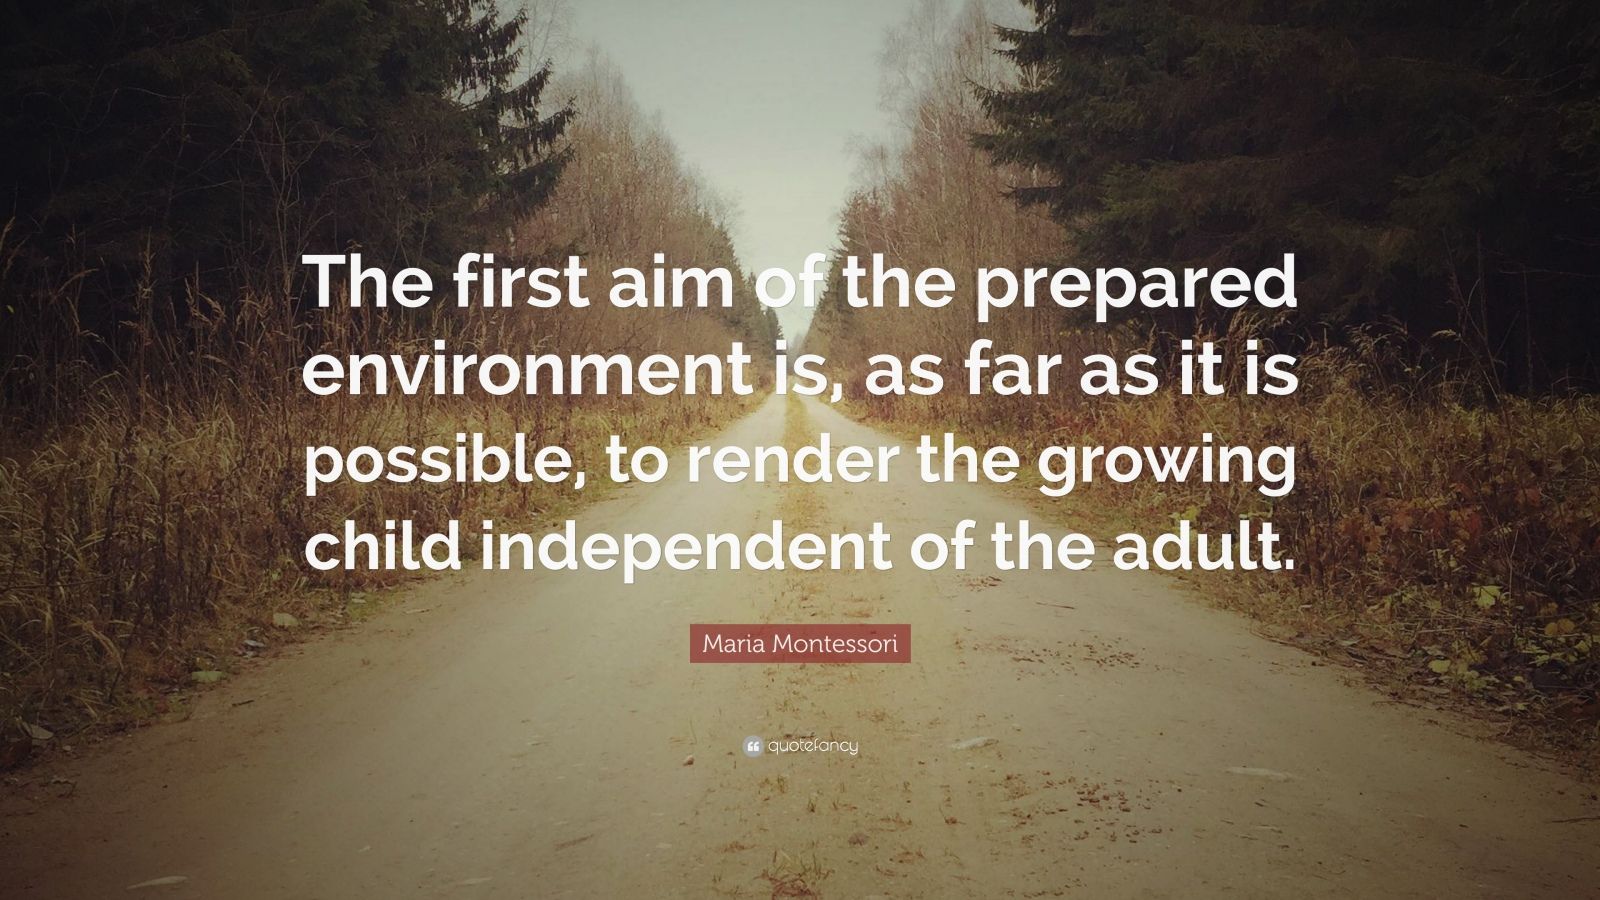 Maria Montessori Quote: “The first aim of the prepared environment is